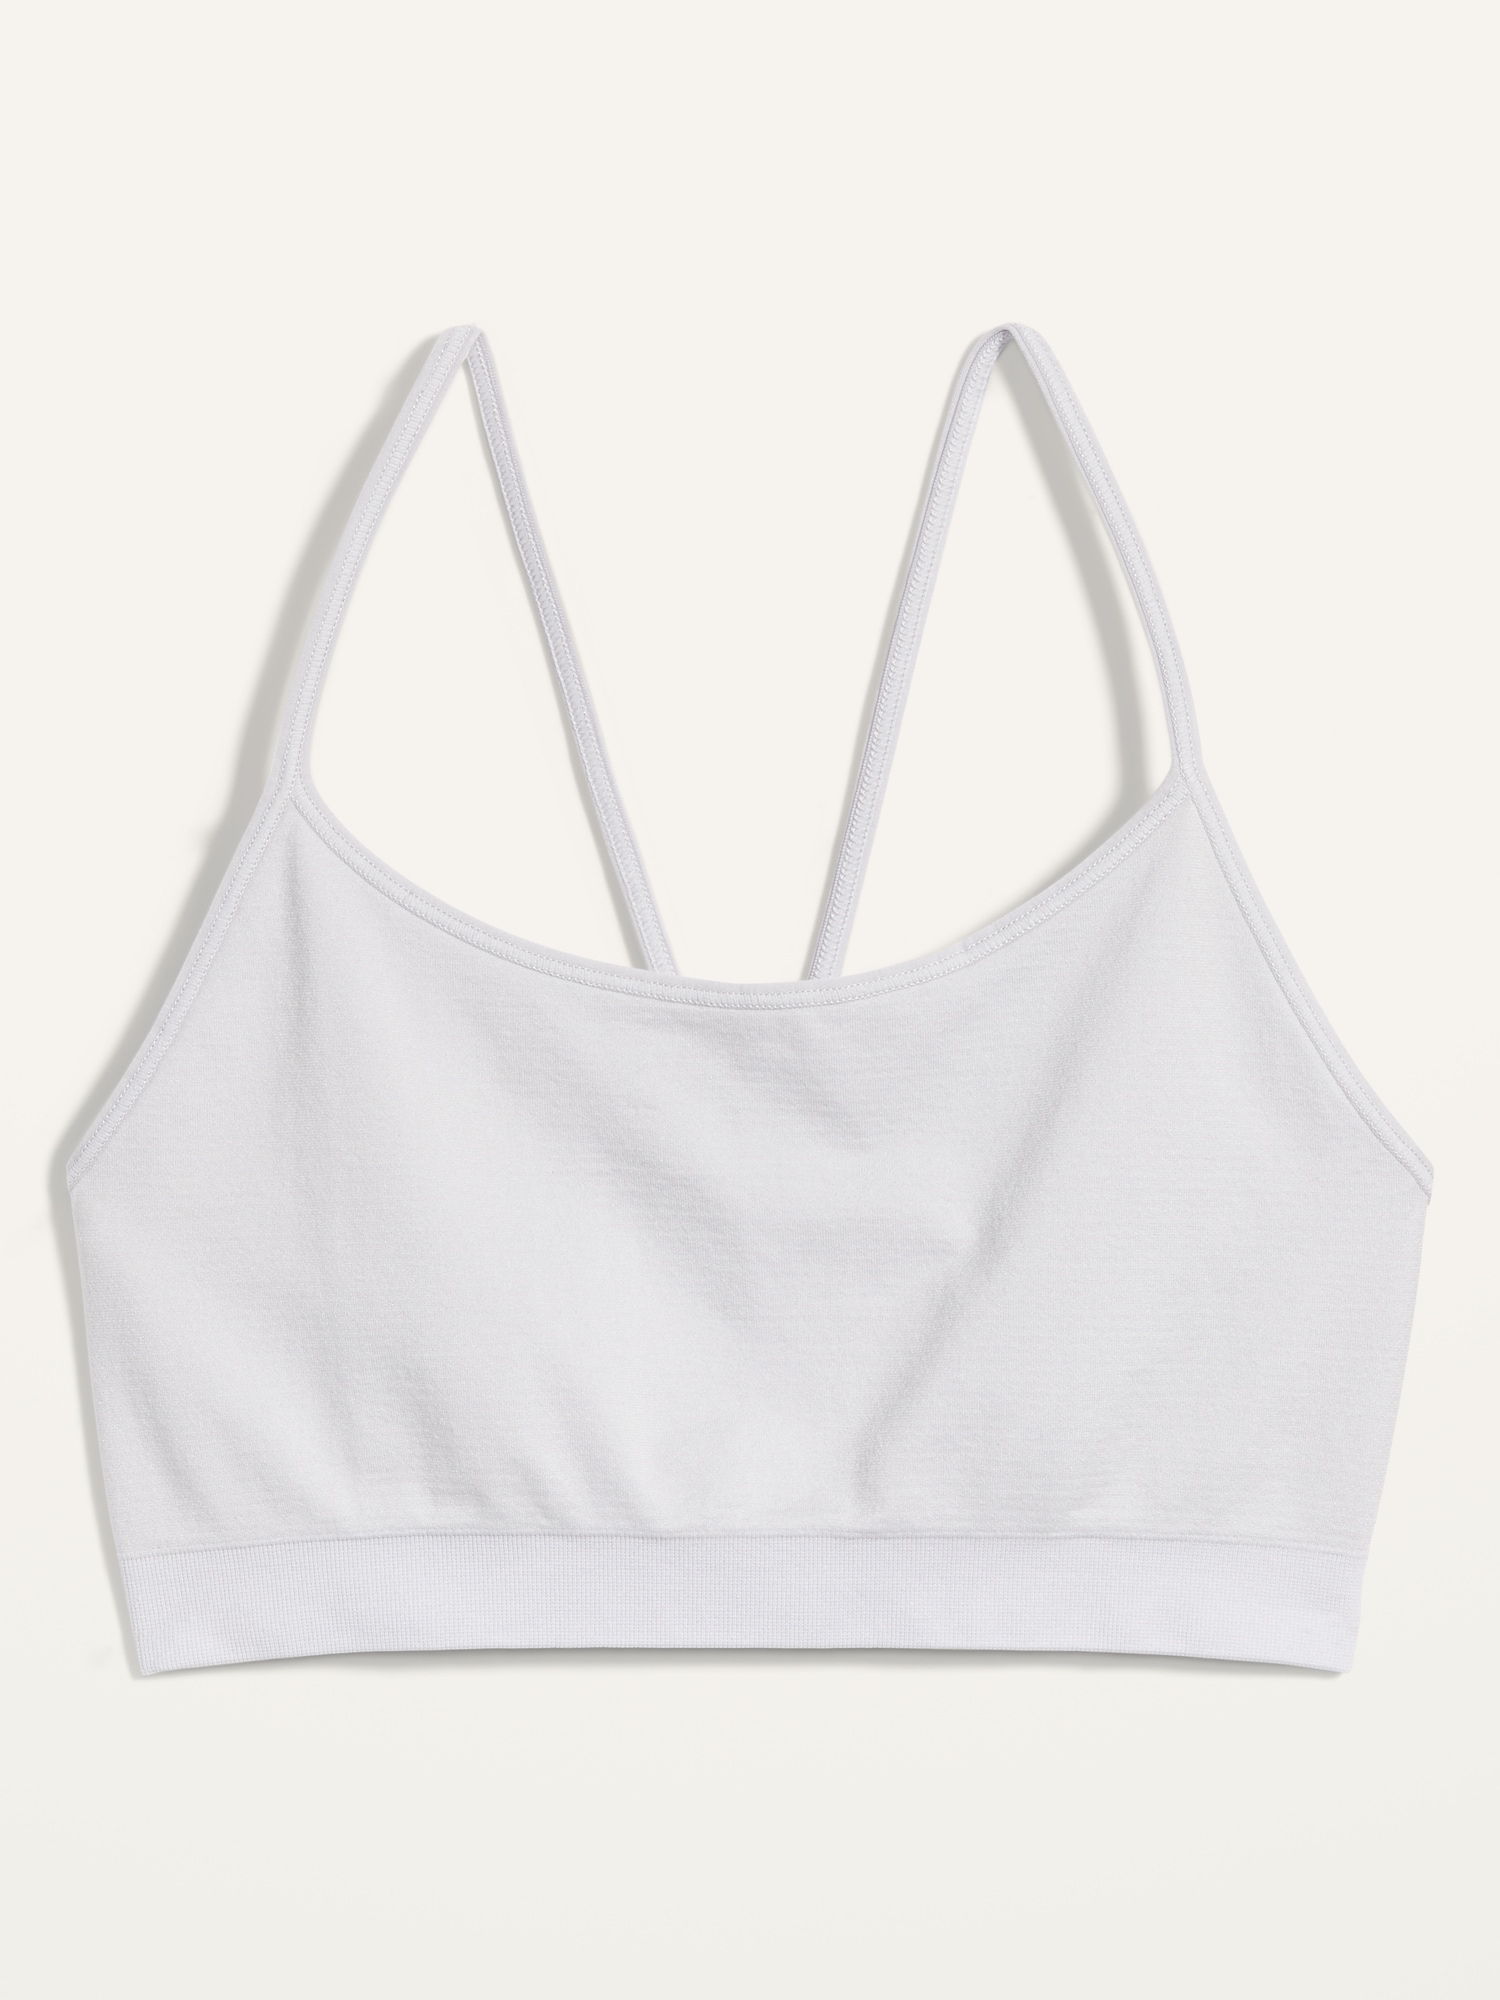 Seamless Lounge Bralette Top | Old Navy